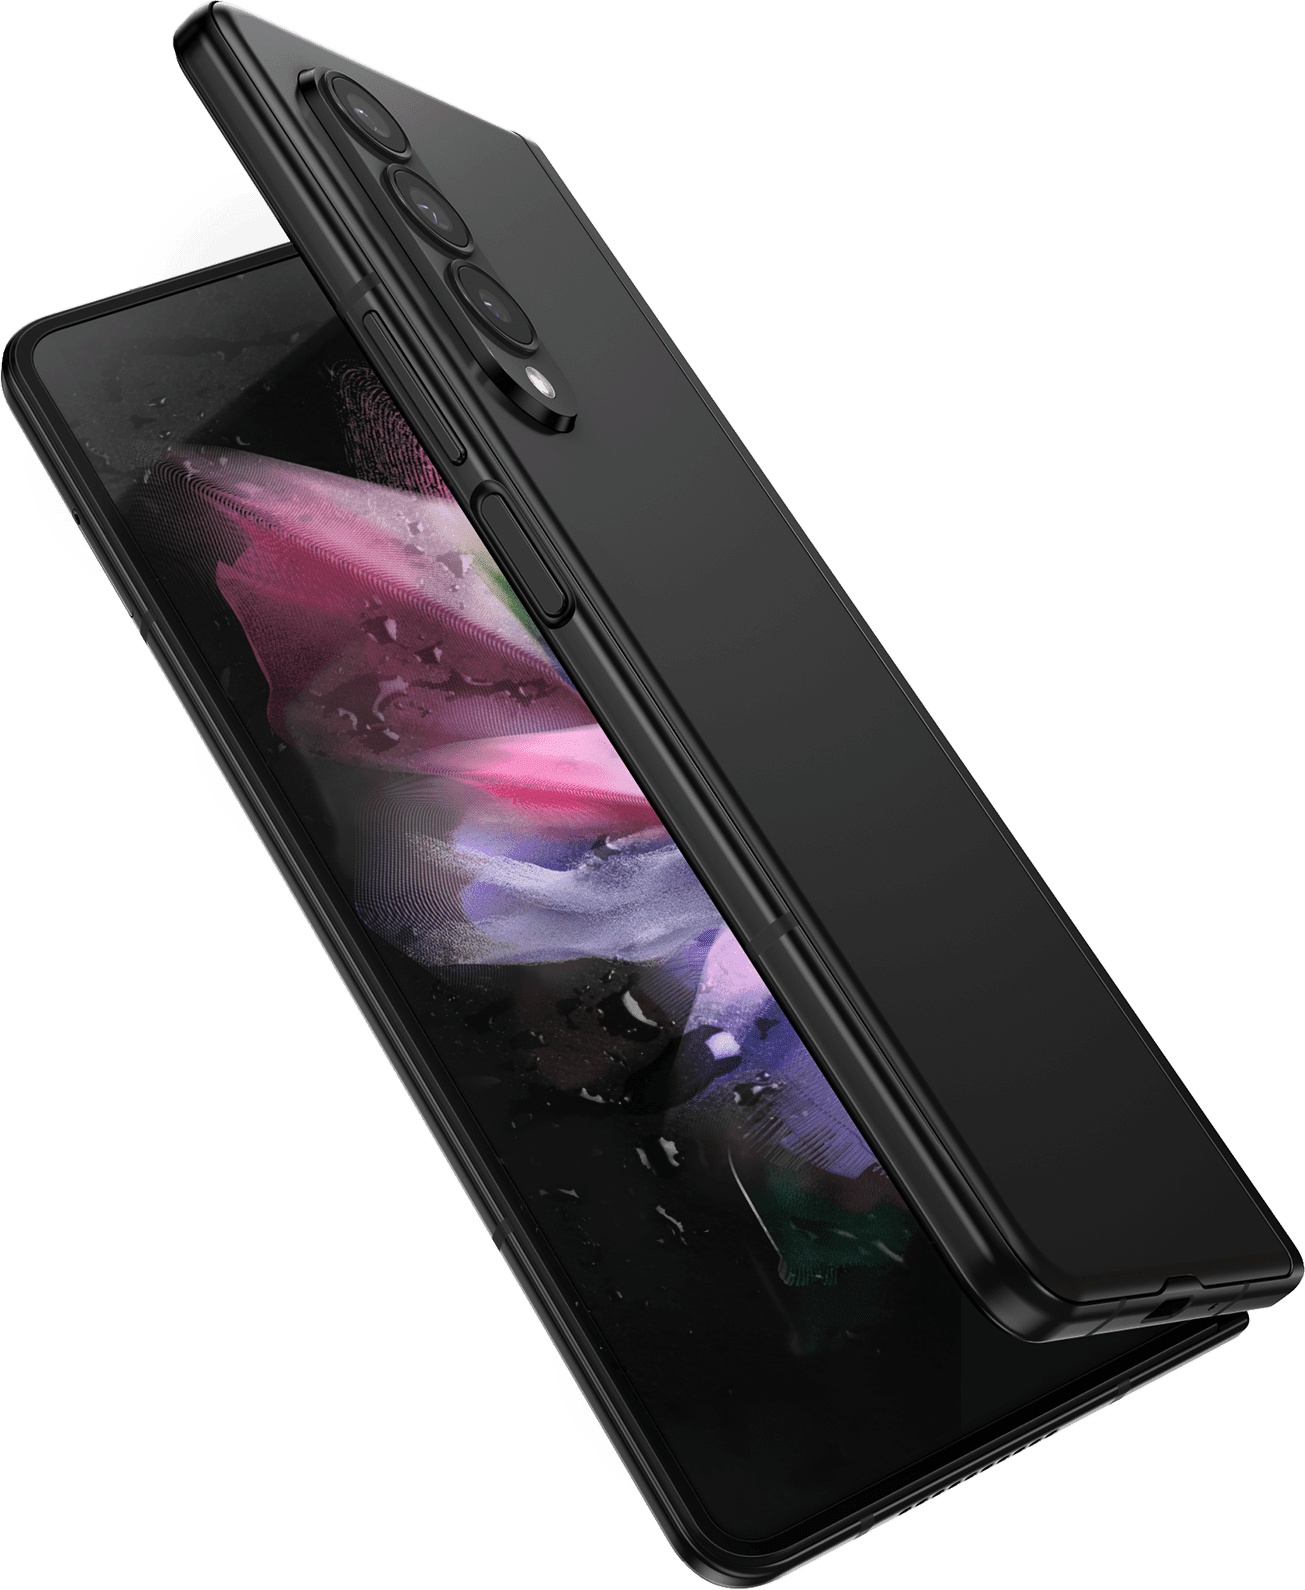 Galaxy Z Fold3 5G partially unfolded and seen from the open side, with a colourful wallpaper on the Main Screen. It is surrounded by a splash of water.